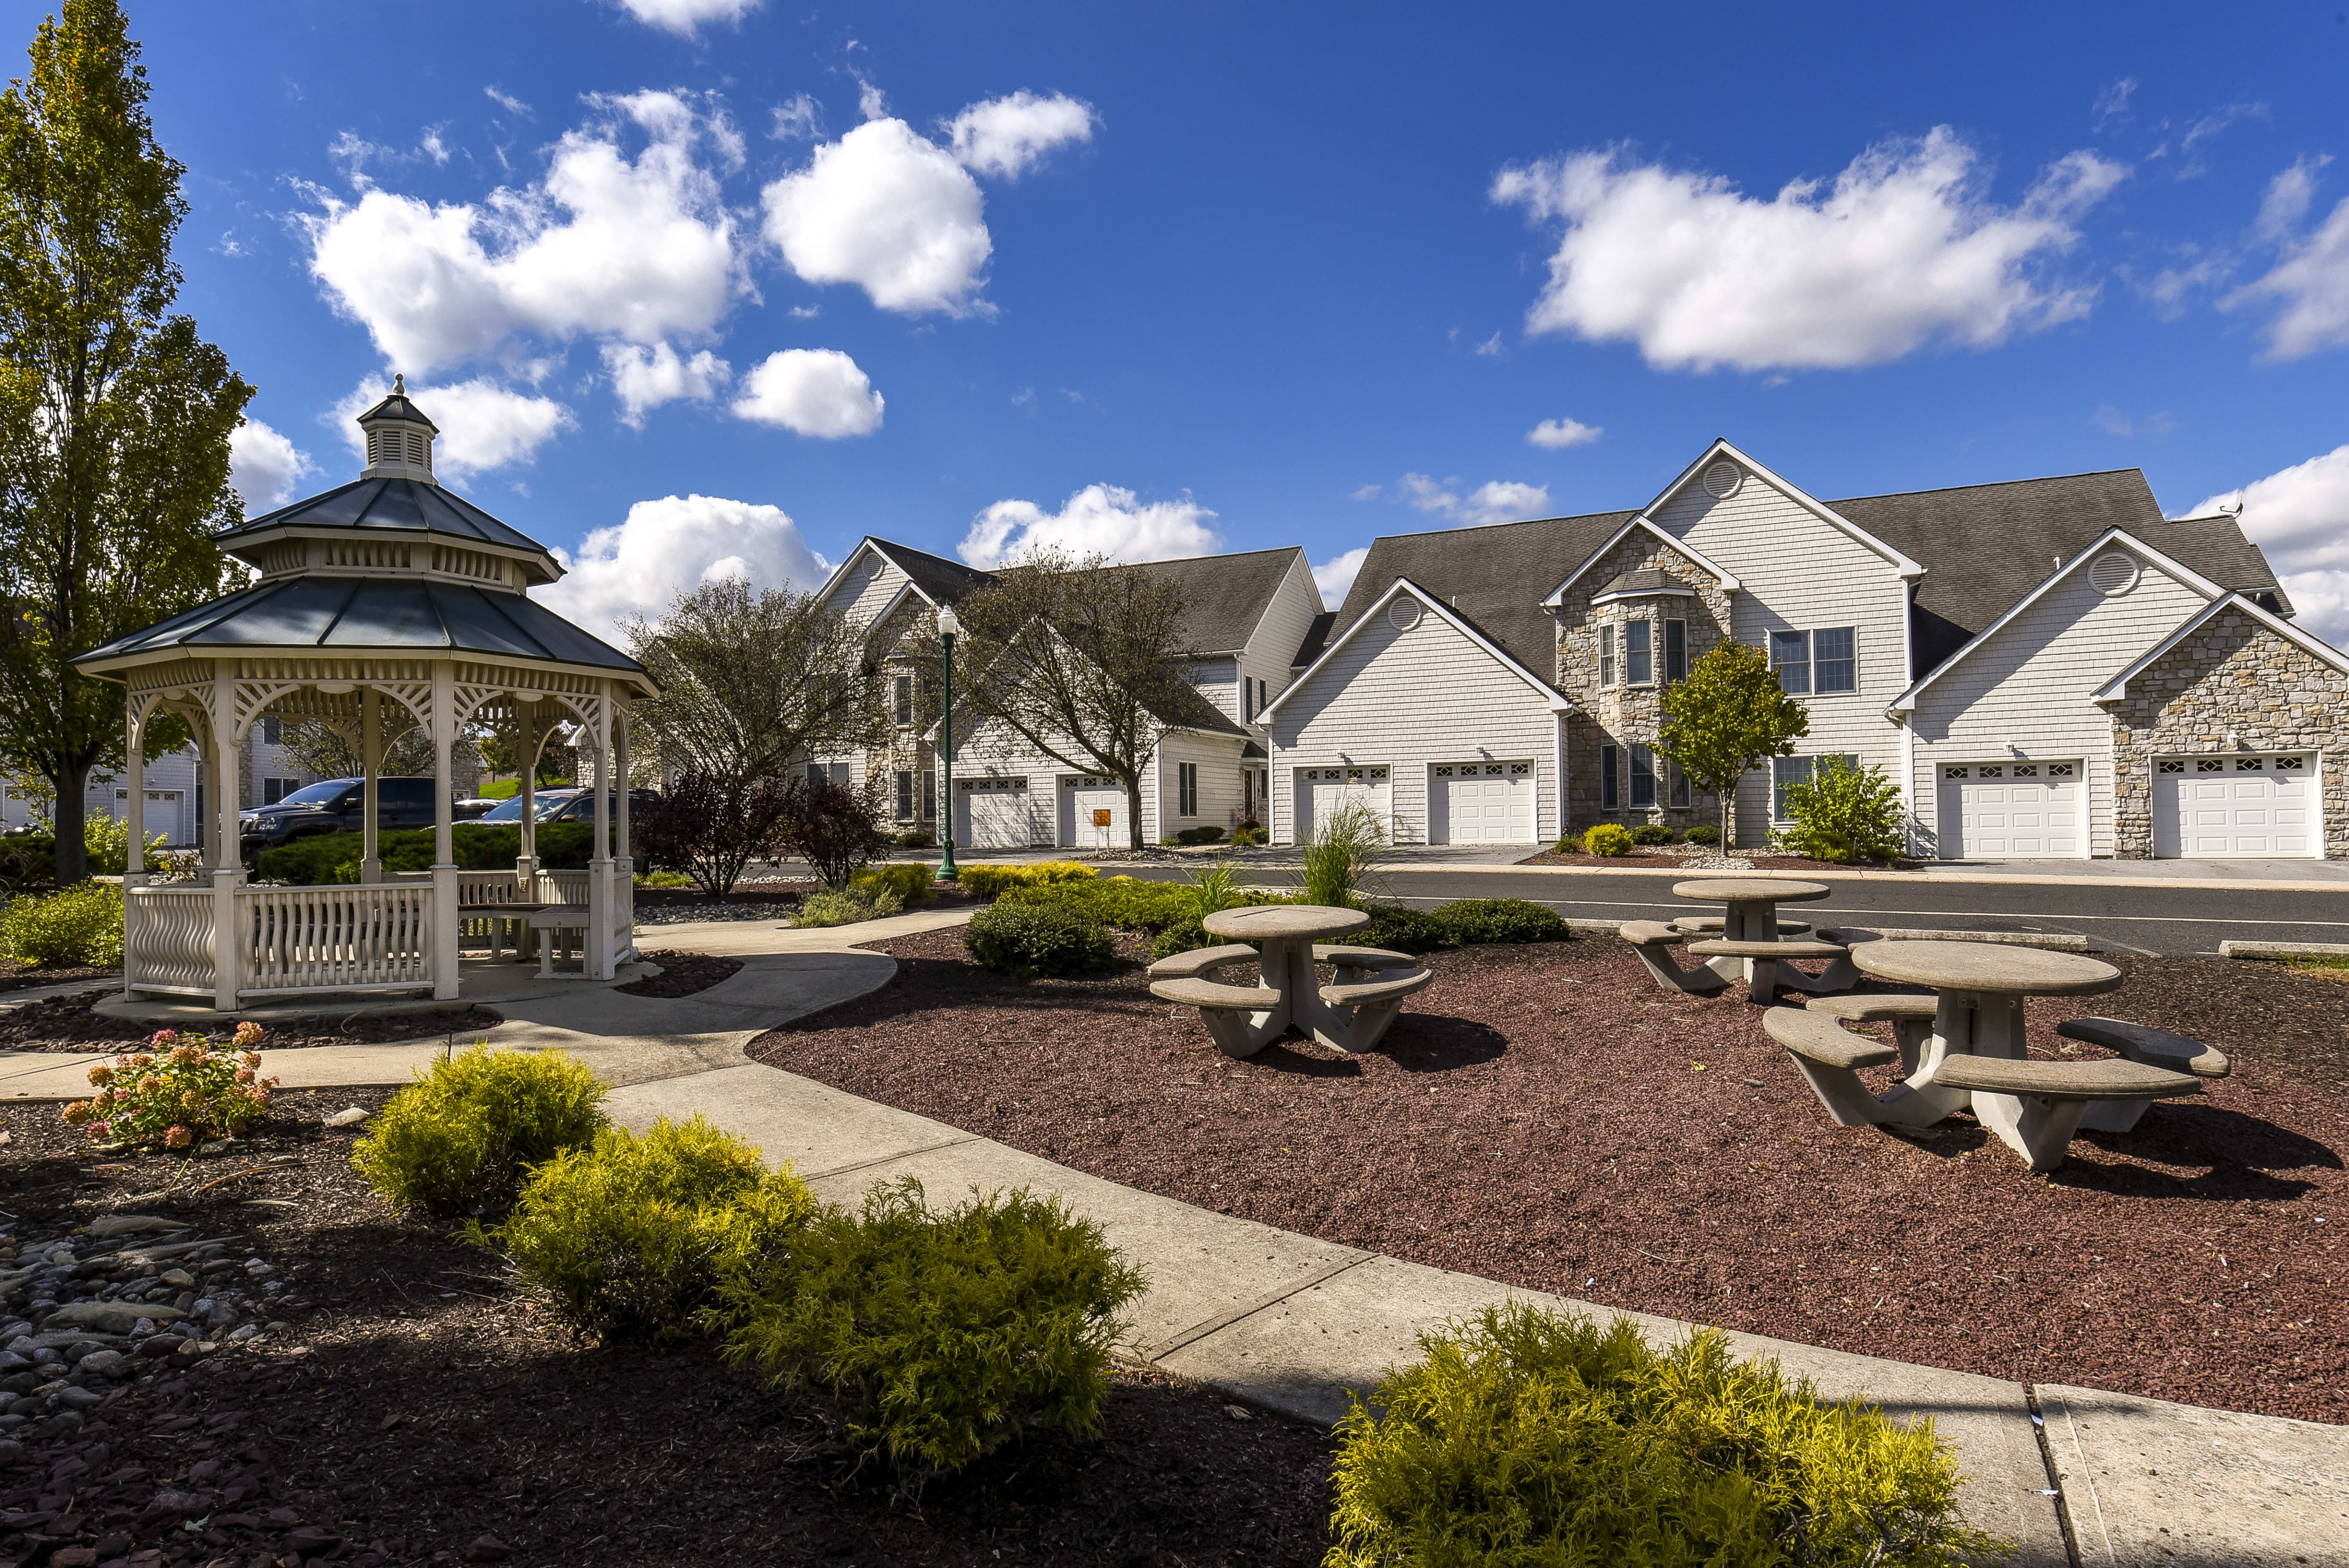 Townhome with green lawn at Springhouse Townhomes, Allentown, Pennsylvania